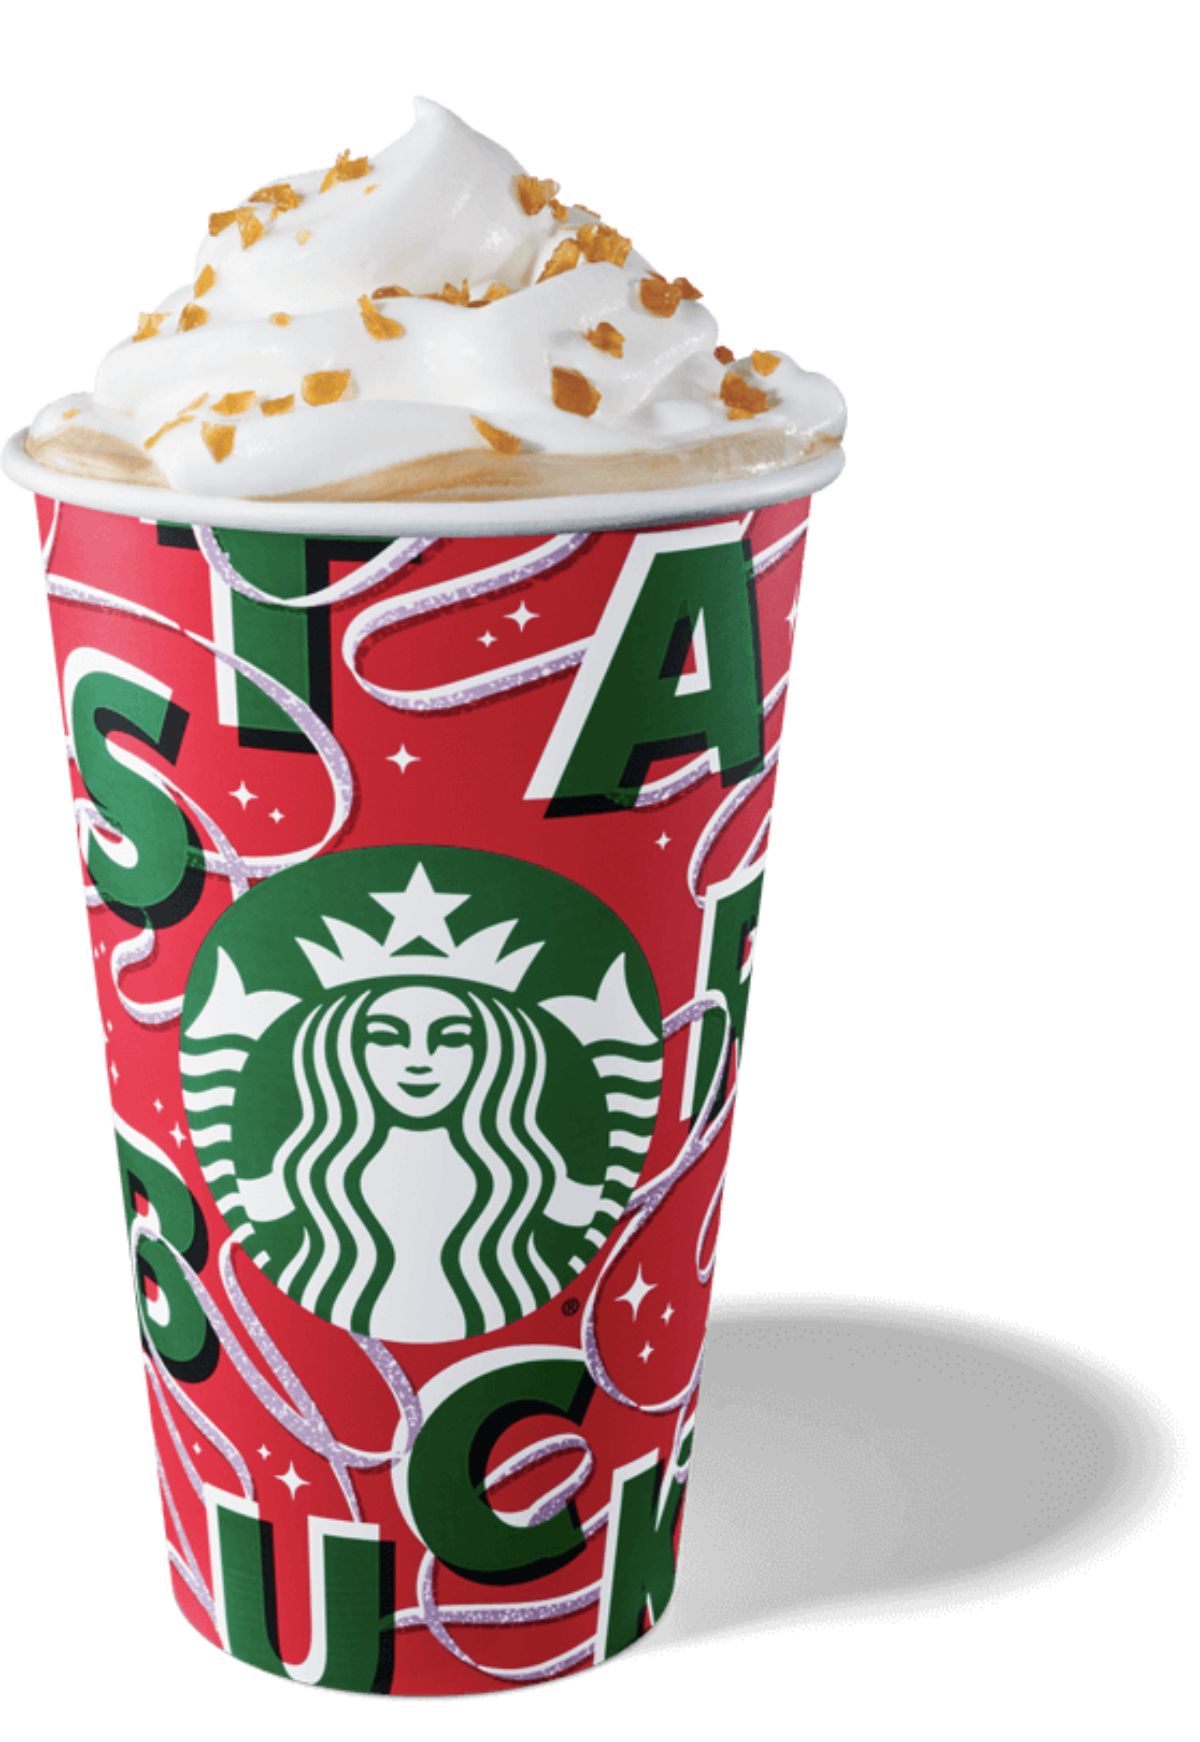 The holiday light starbucks holiday cup 2021